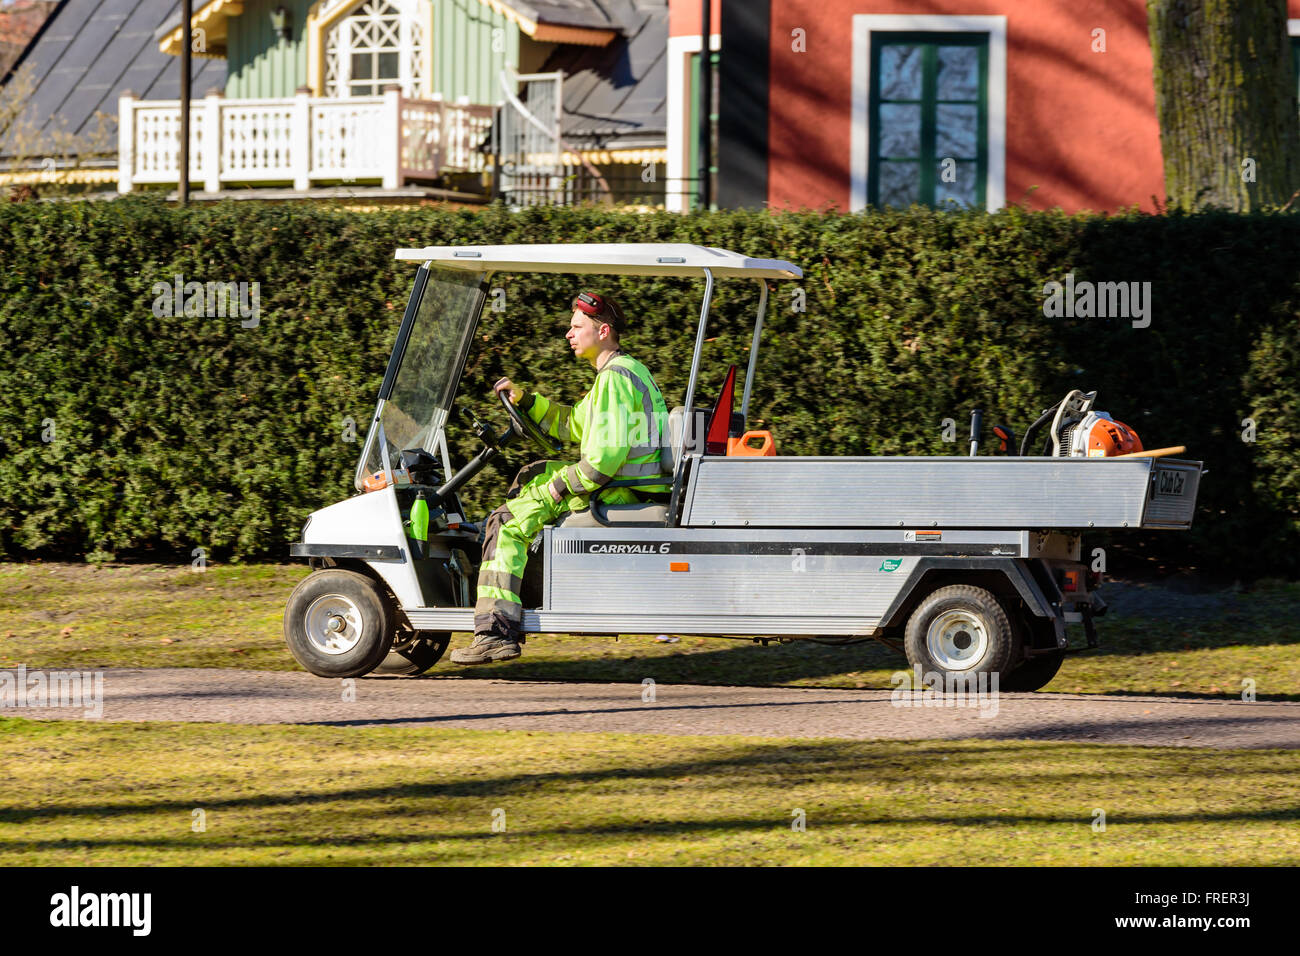 Kalmar, Sweden - March 17, 2016: Male worker in greenish yellow work clothes drive by in a zero emission vehicle, an electric Cl Stock Photo